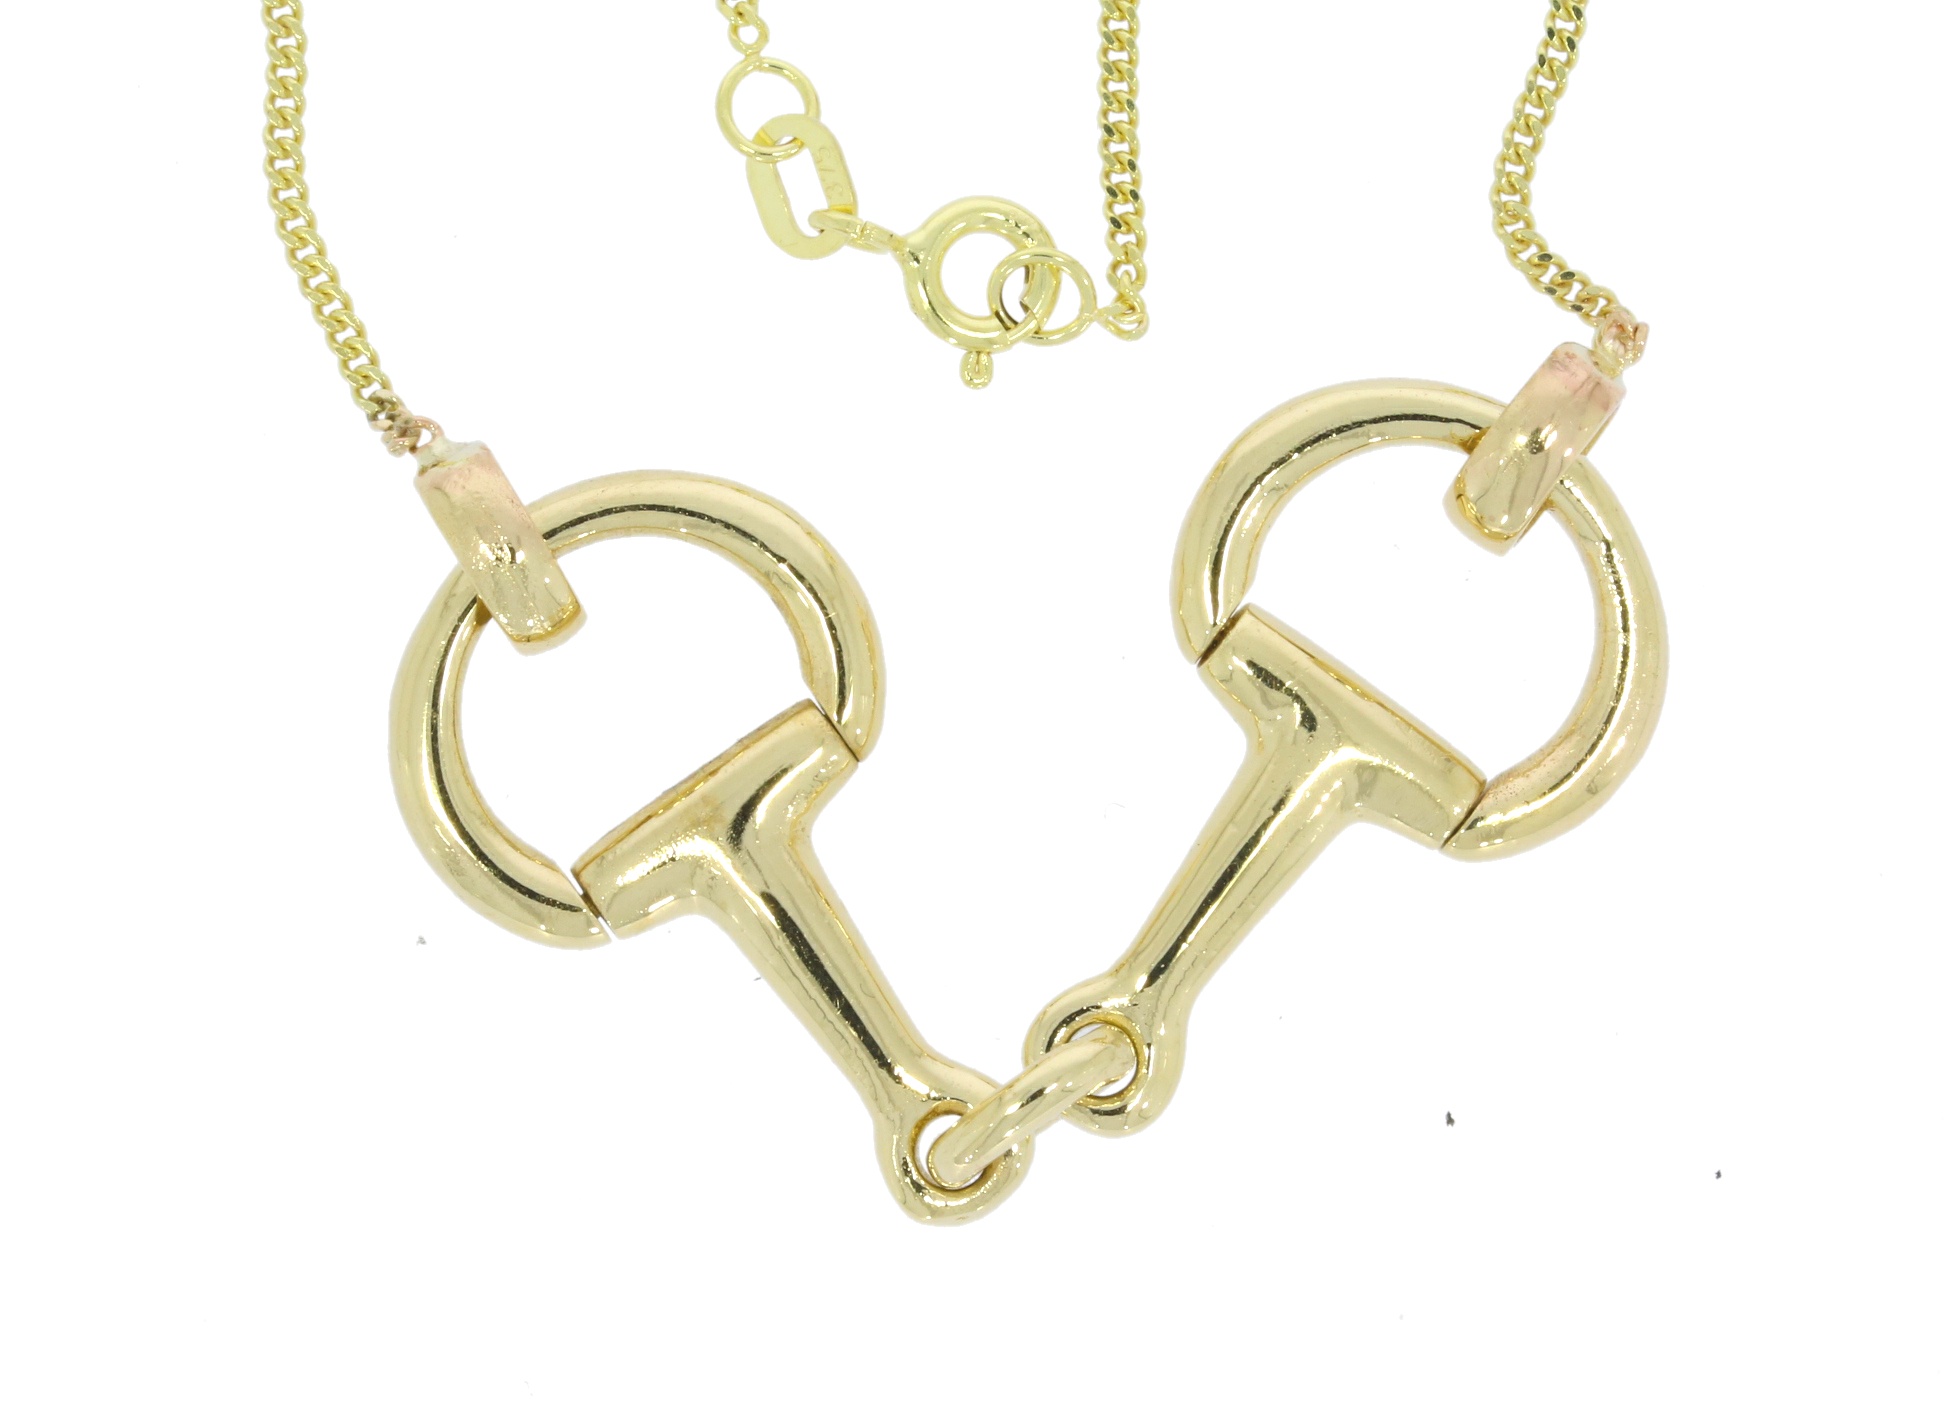 Equestrian Jewellery Collection 9ct Yellow Gold Snaffle Bit Horse Equestrian Design Pendant